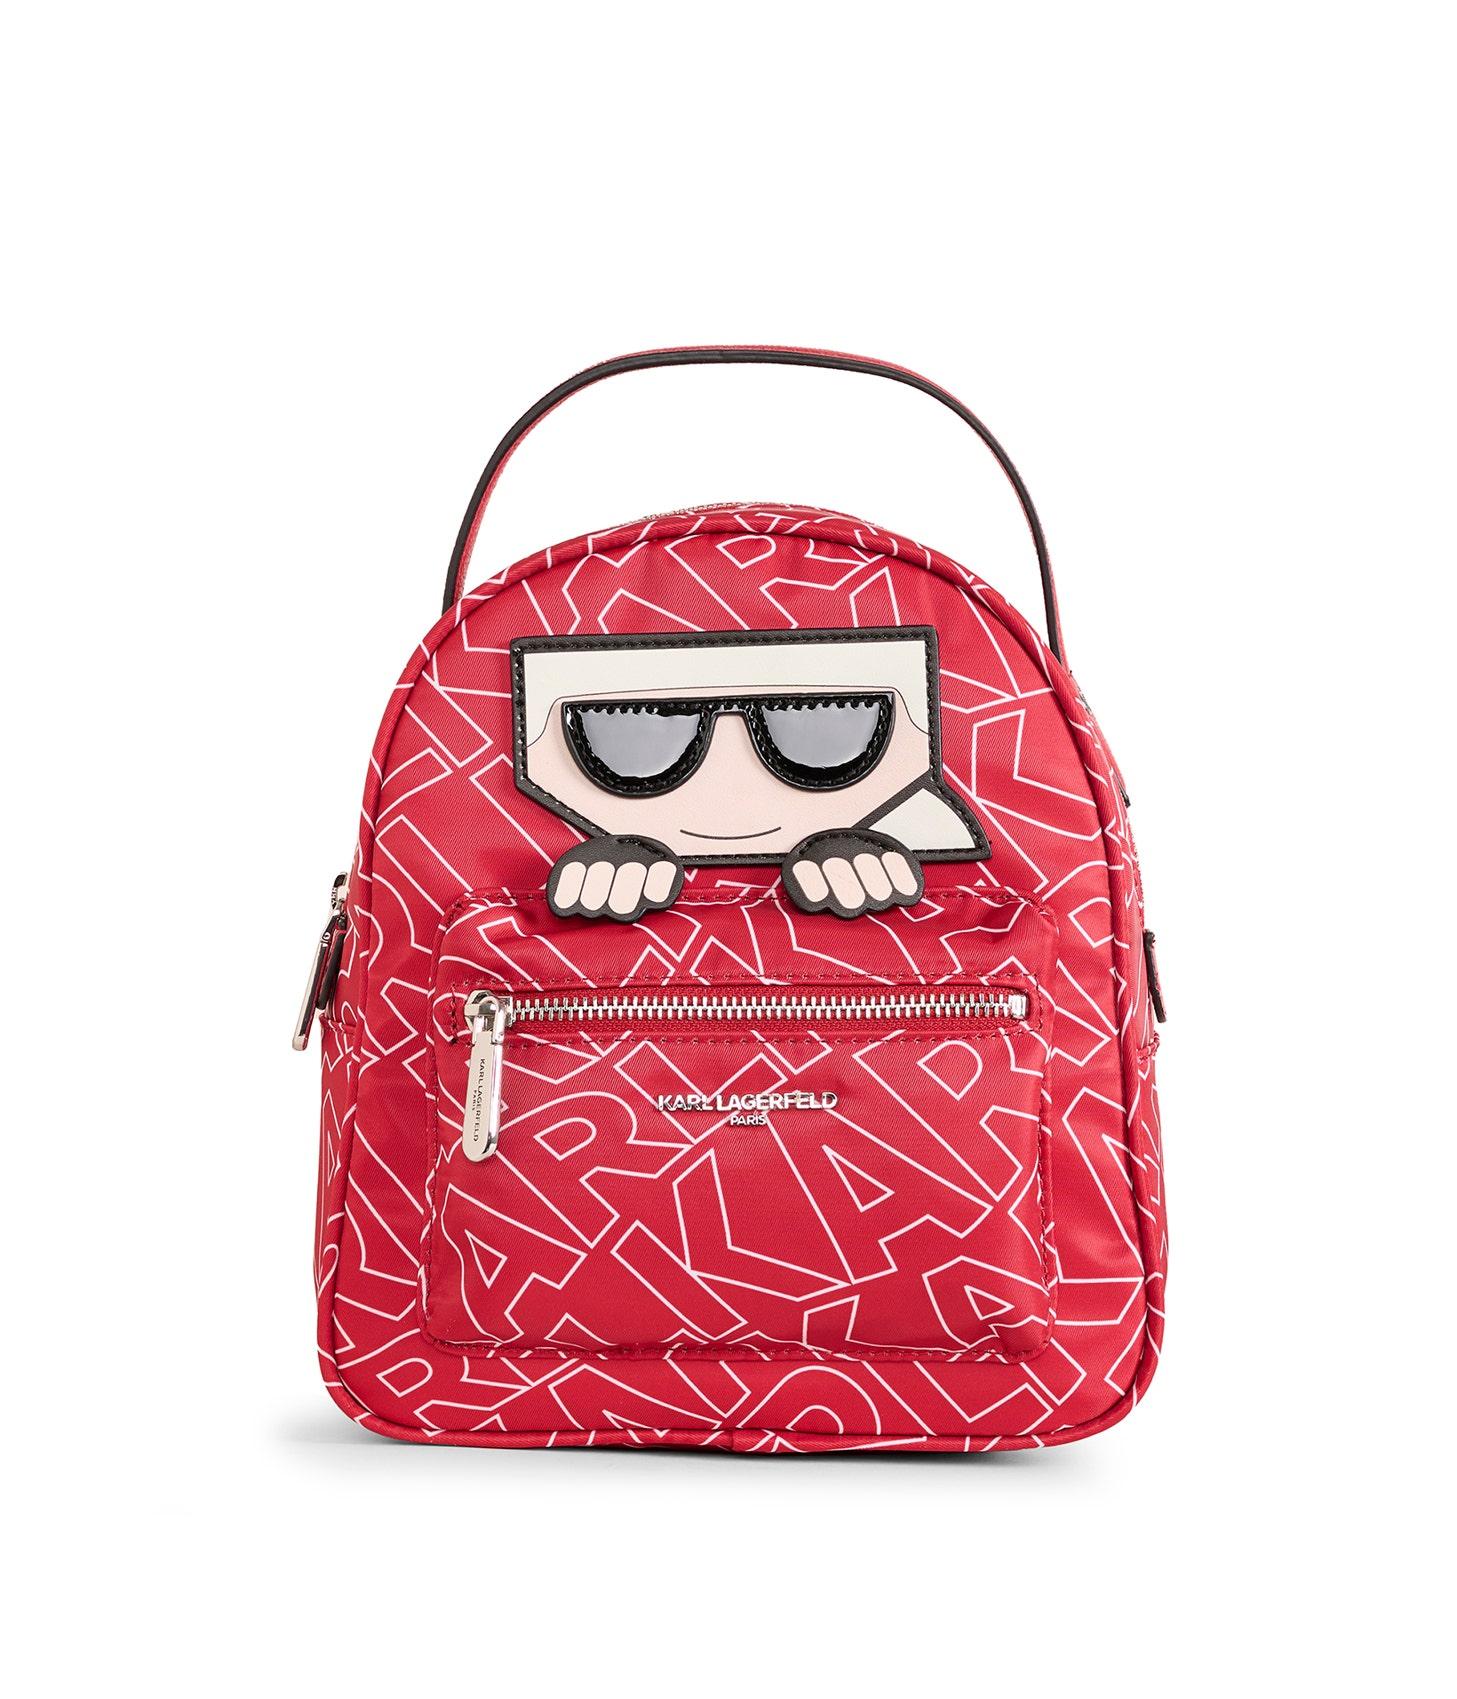 Karl Lagerfeld | Women's Amour Nylon Backpack | Red/white | Size | Lyst